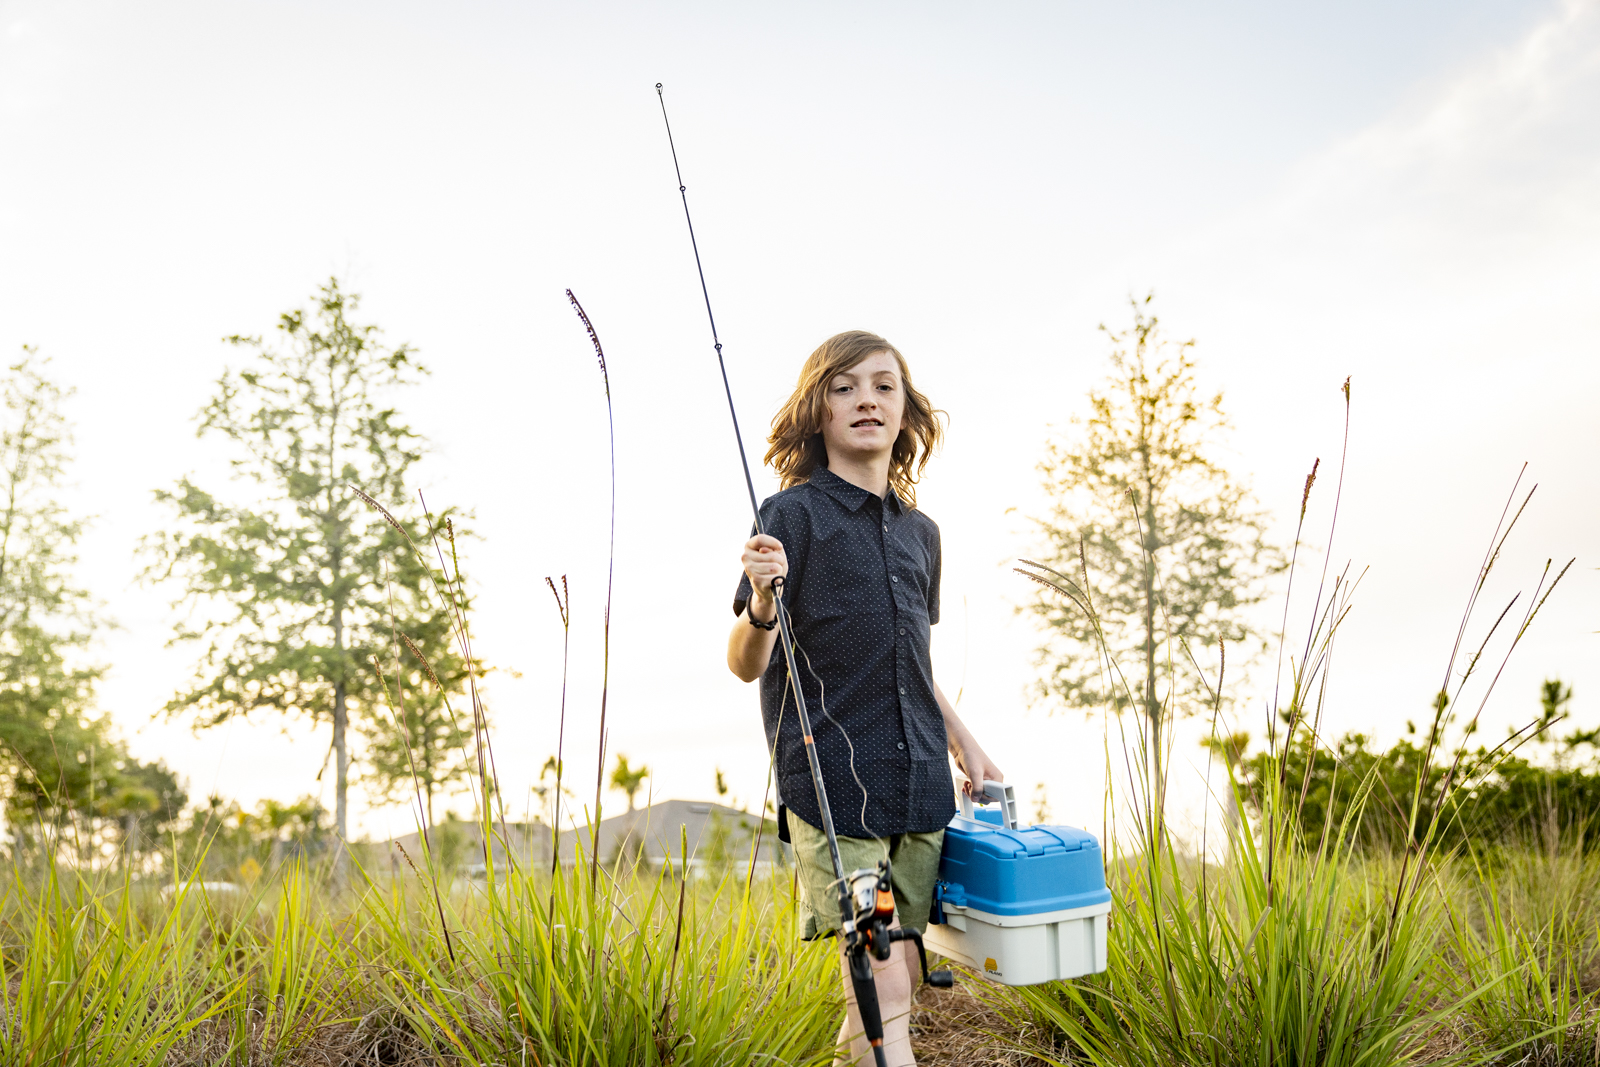 A young boy holding a fishing pole in the grass.